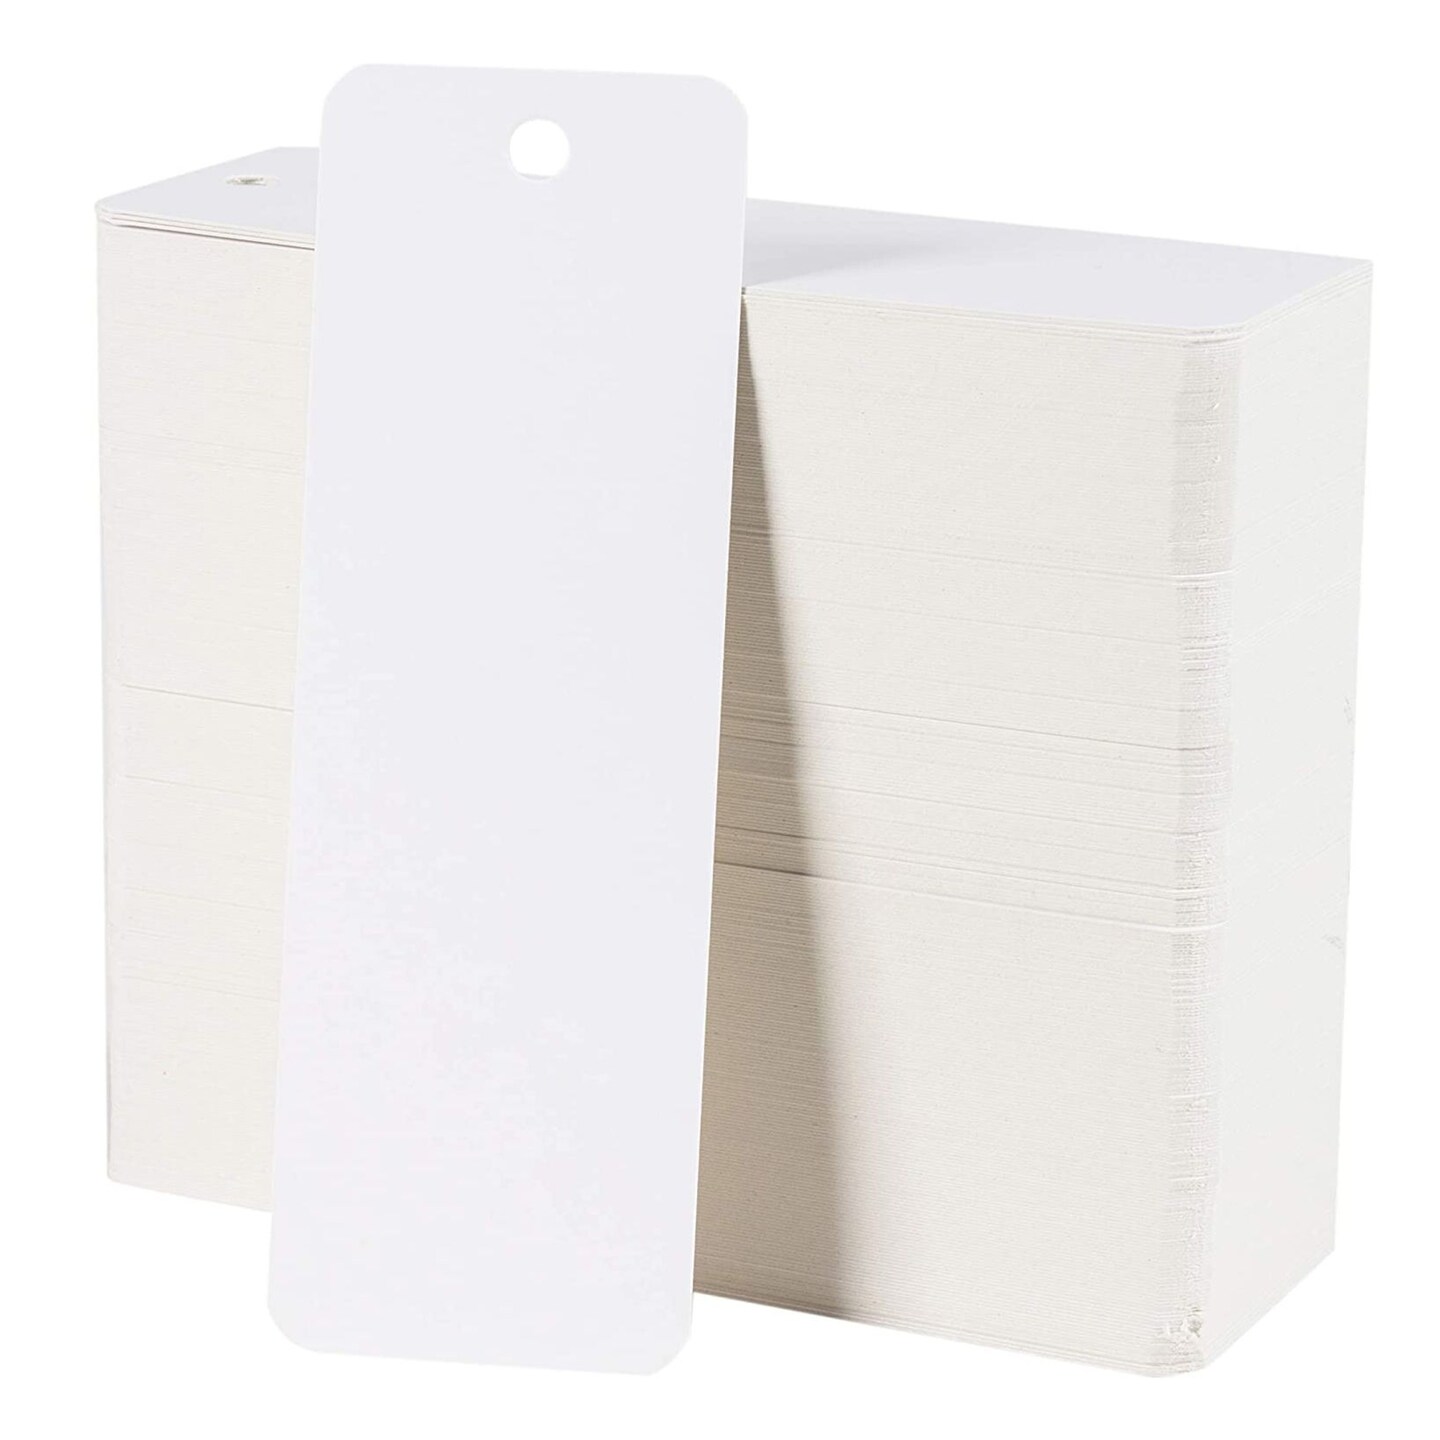 300 Pack Bulk Blank Bookmarks for DIY Crafts, White Plain Bookmarks to  Decorate (6 x 2 In)